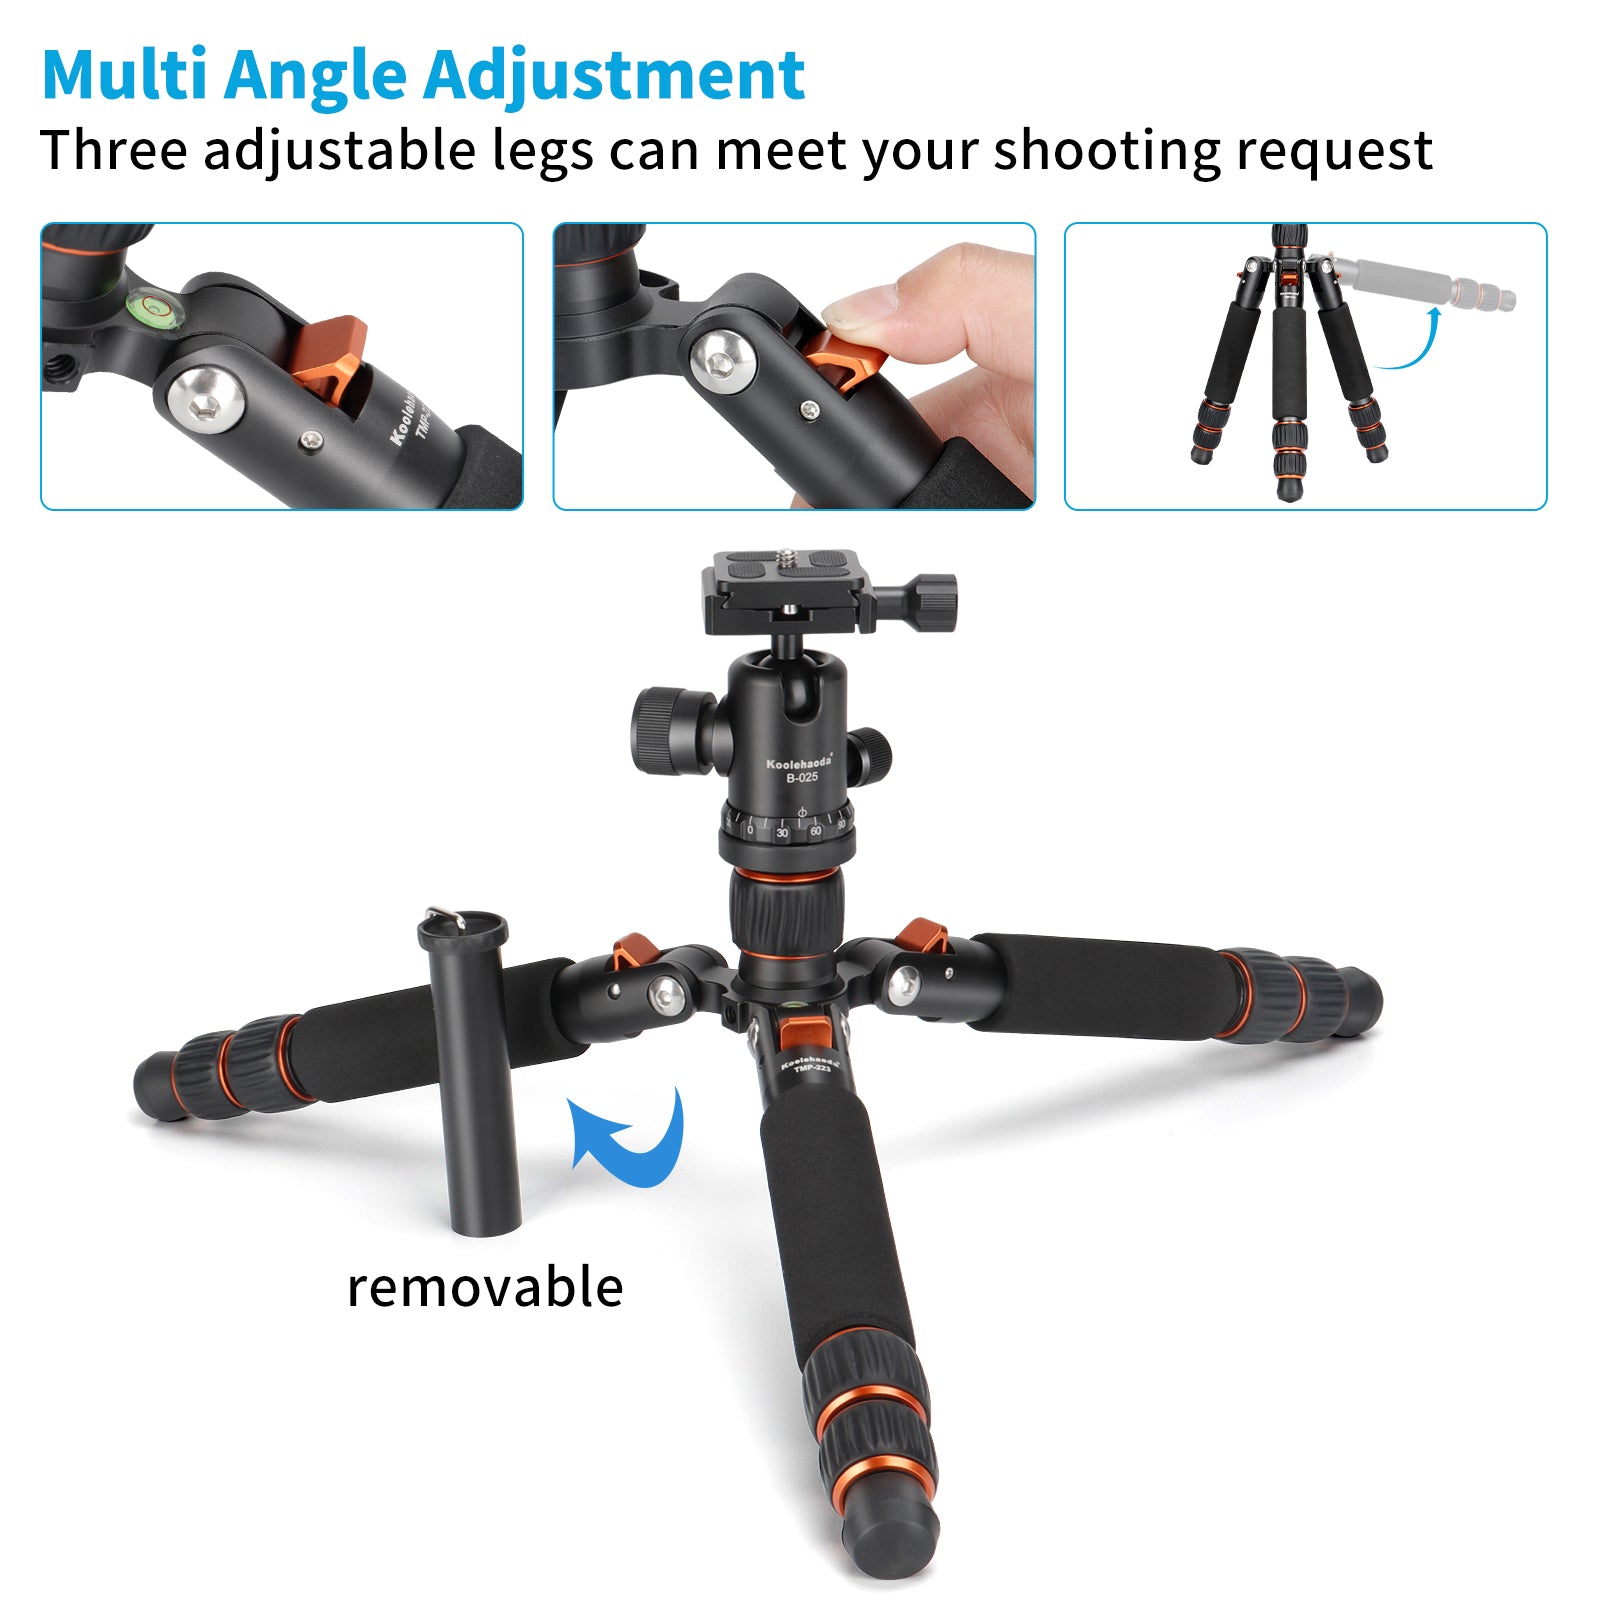 Koolehaoda Mini Tripod Aluminum Alloy Tabletop Tripod Height 21-63.5cm with Carrying Bag for DSLR Camera Video Camcorder, Load up to 22lbs /10kg - (TMP-223 Orange)